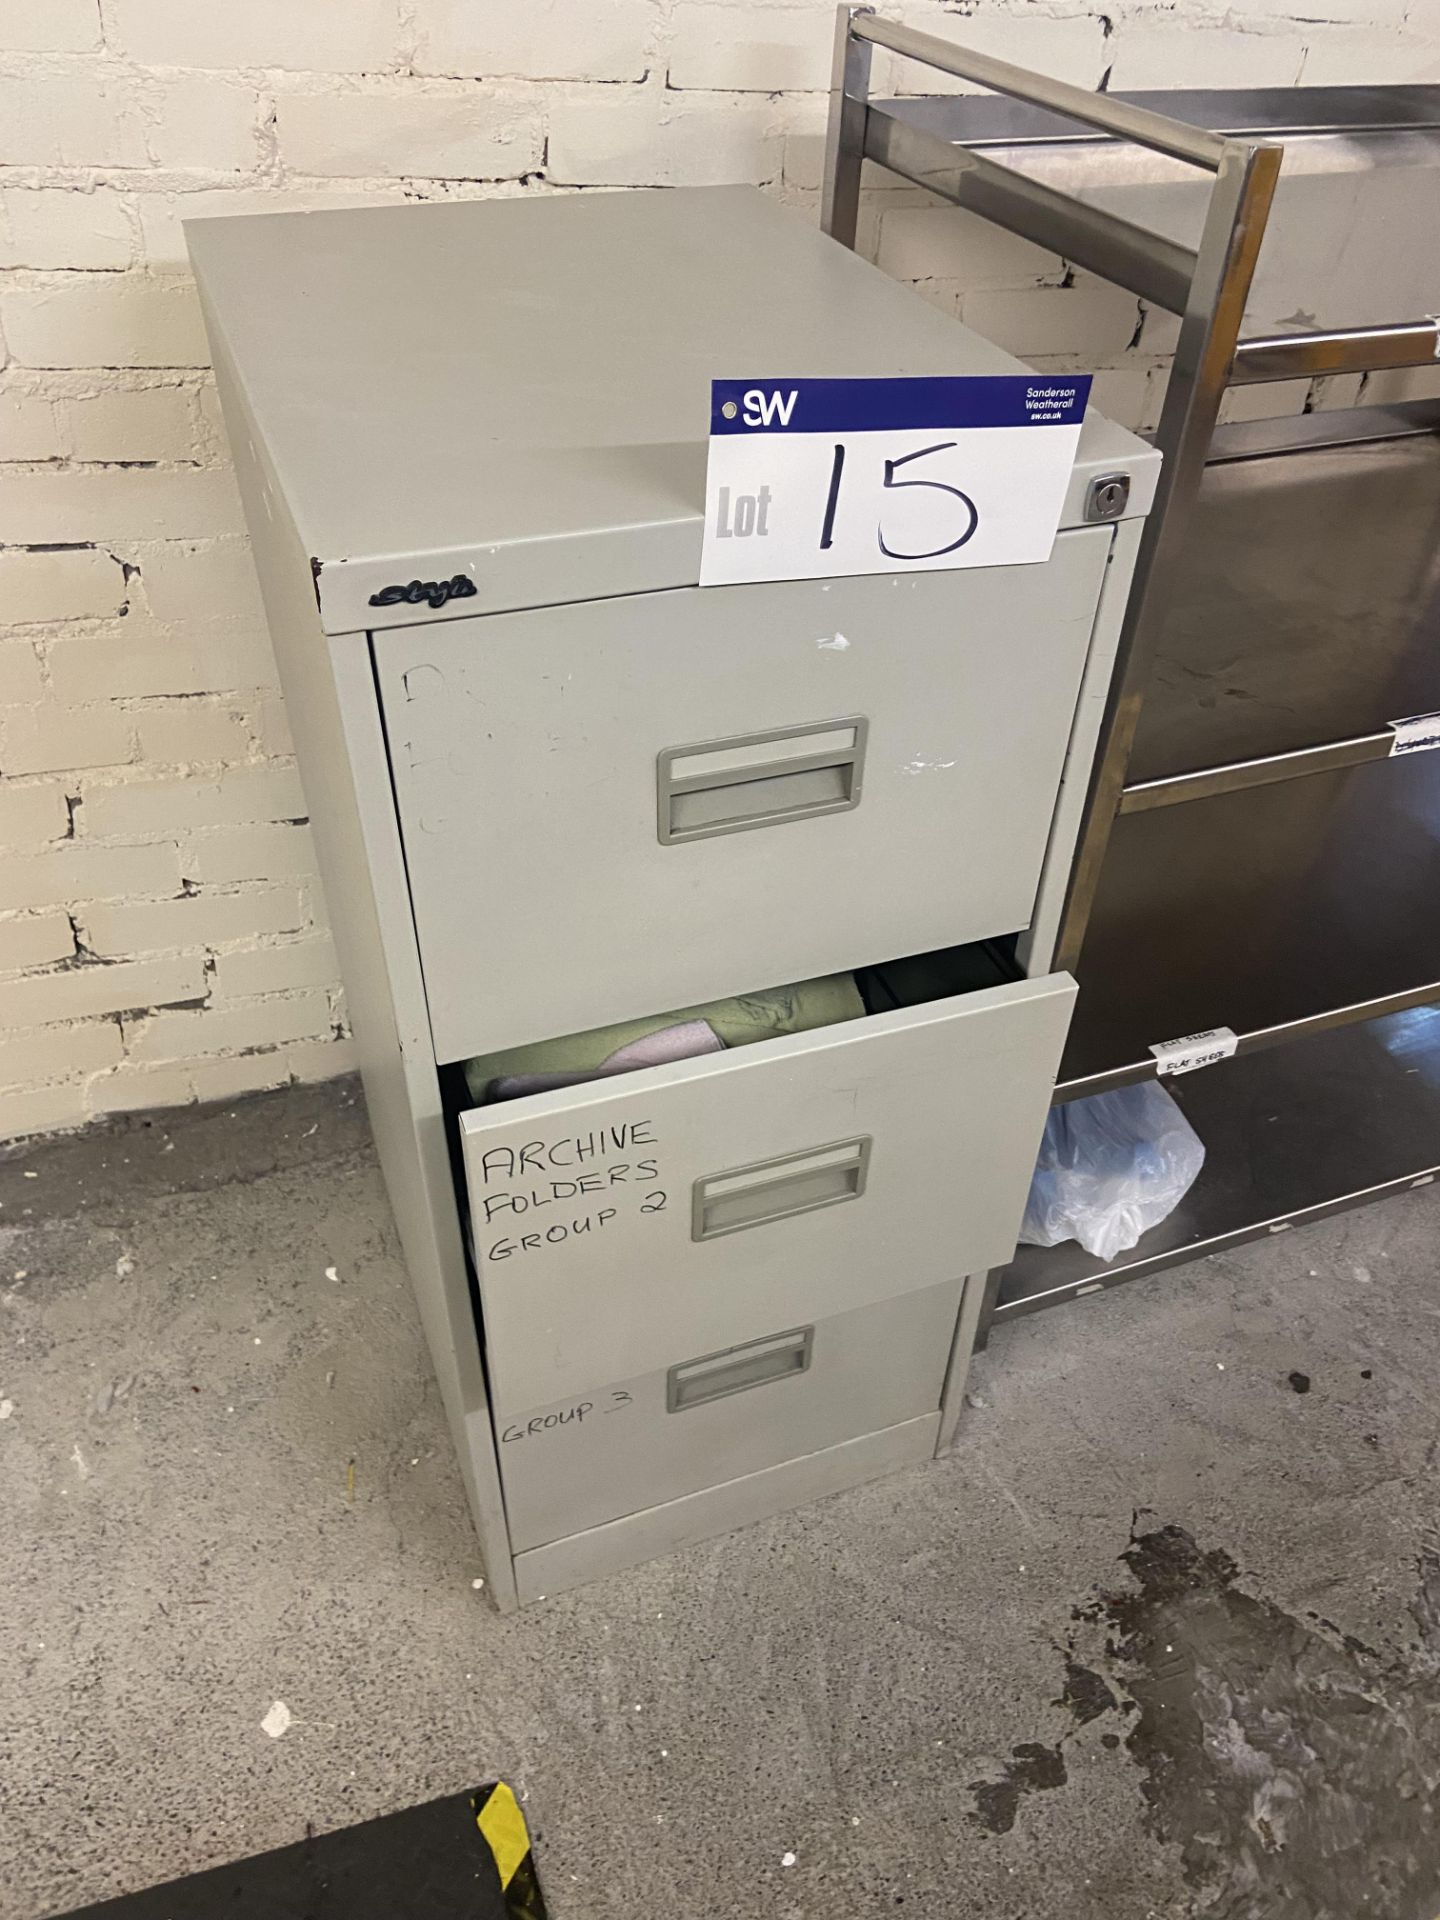 Three Drawer Steel Filing Cabinet Please read the following important notes:- ***Overseas buyers -